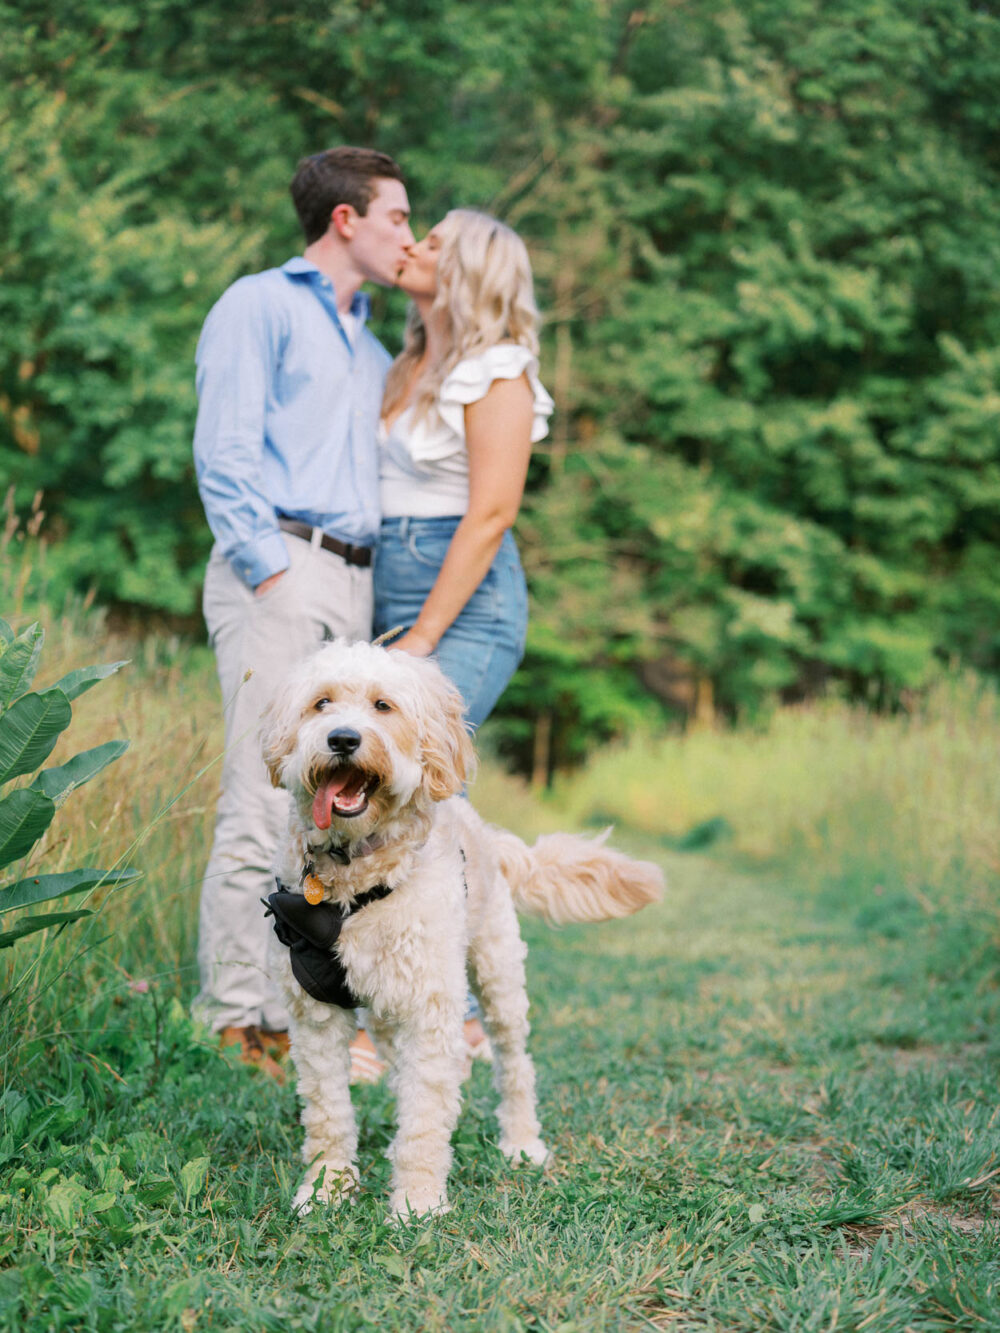 Engagement photos in a grassy field in Cleveland Ohio